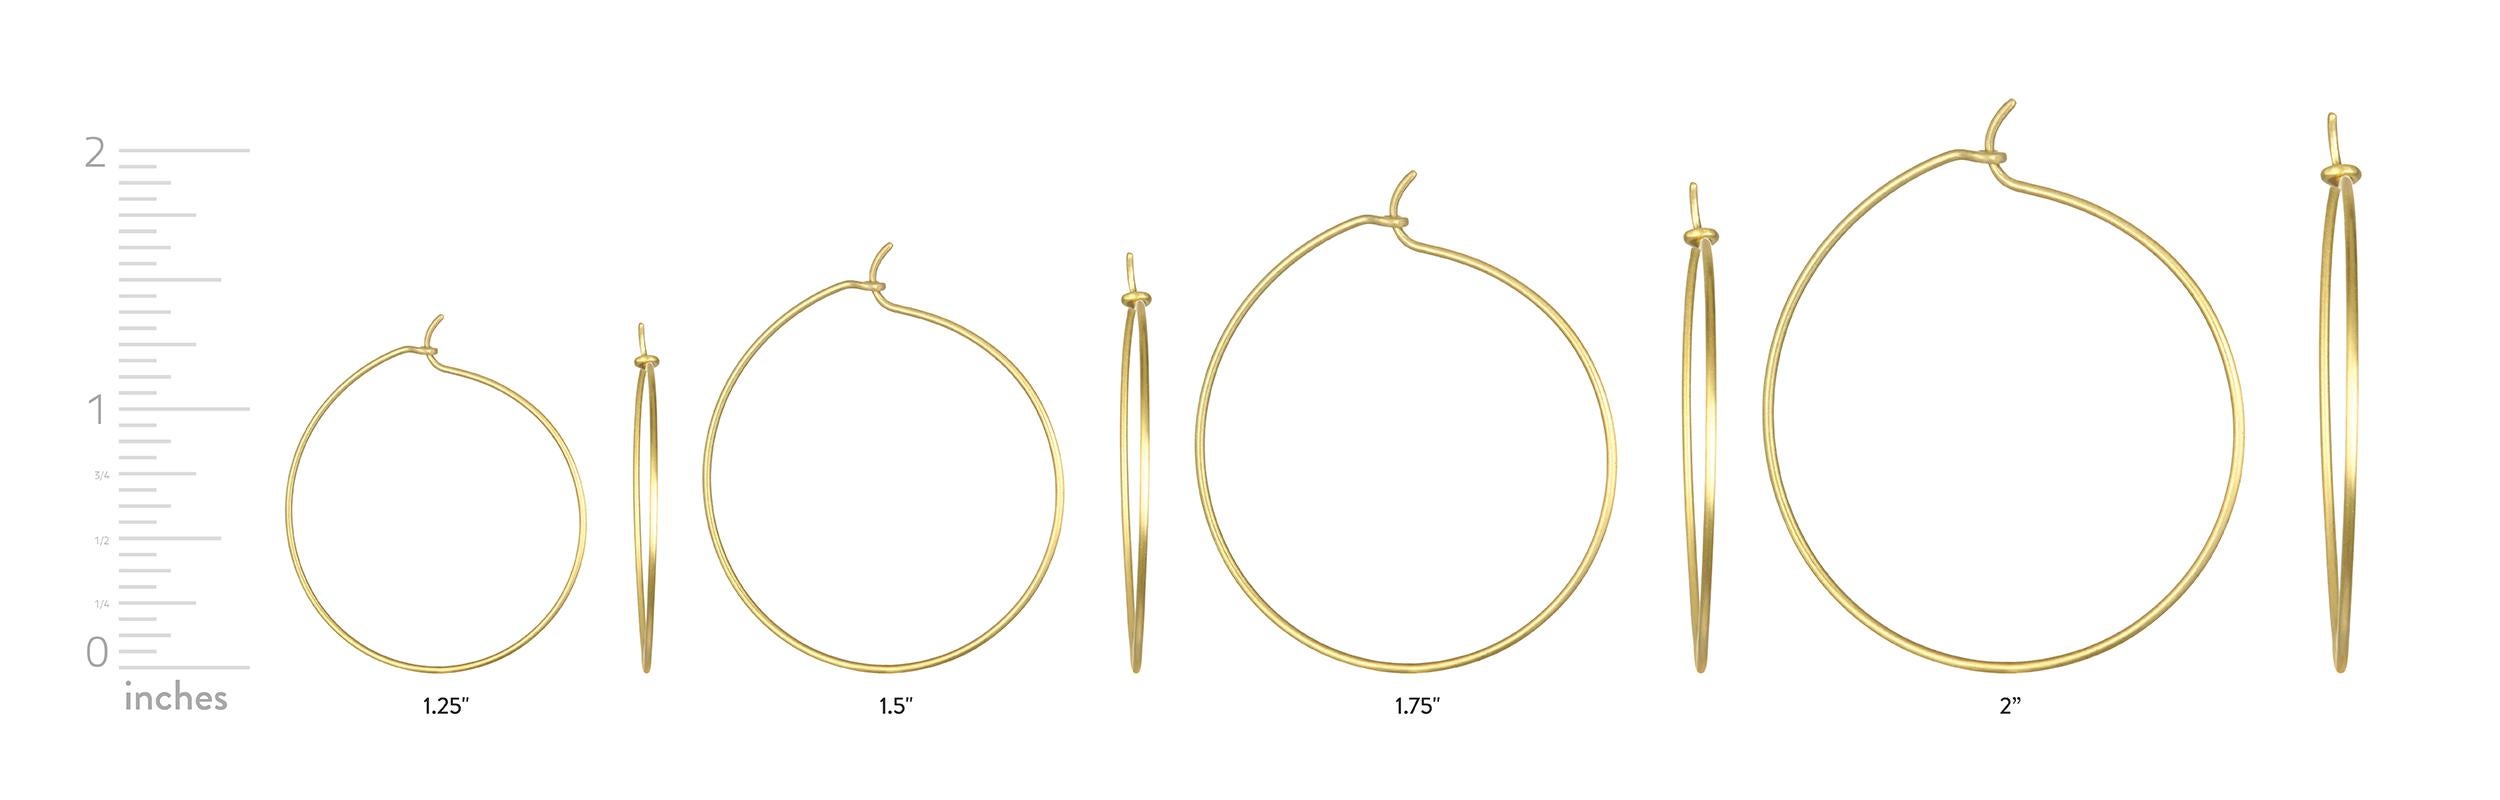 Faye Kim's 18 Karat Gold handmade wire hoops are a must-have for every jewelry wardrobe. Casual, chic and wearable every day, the hoops give endless opportunities to change your look with different drops, sold separately.

Hoops: 1.5